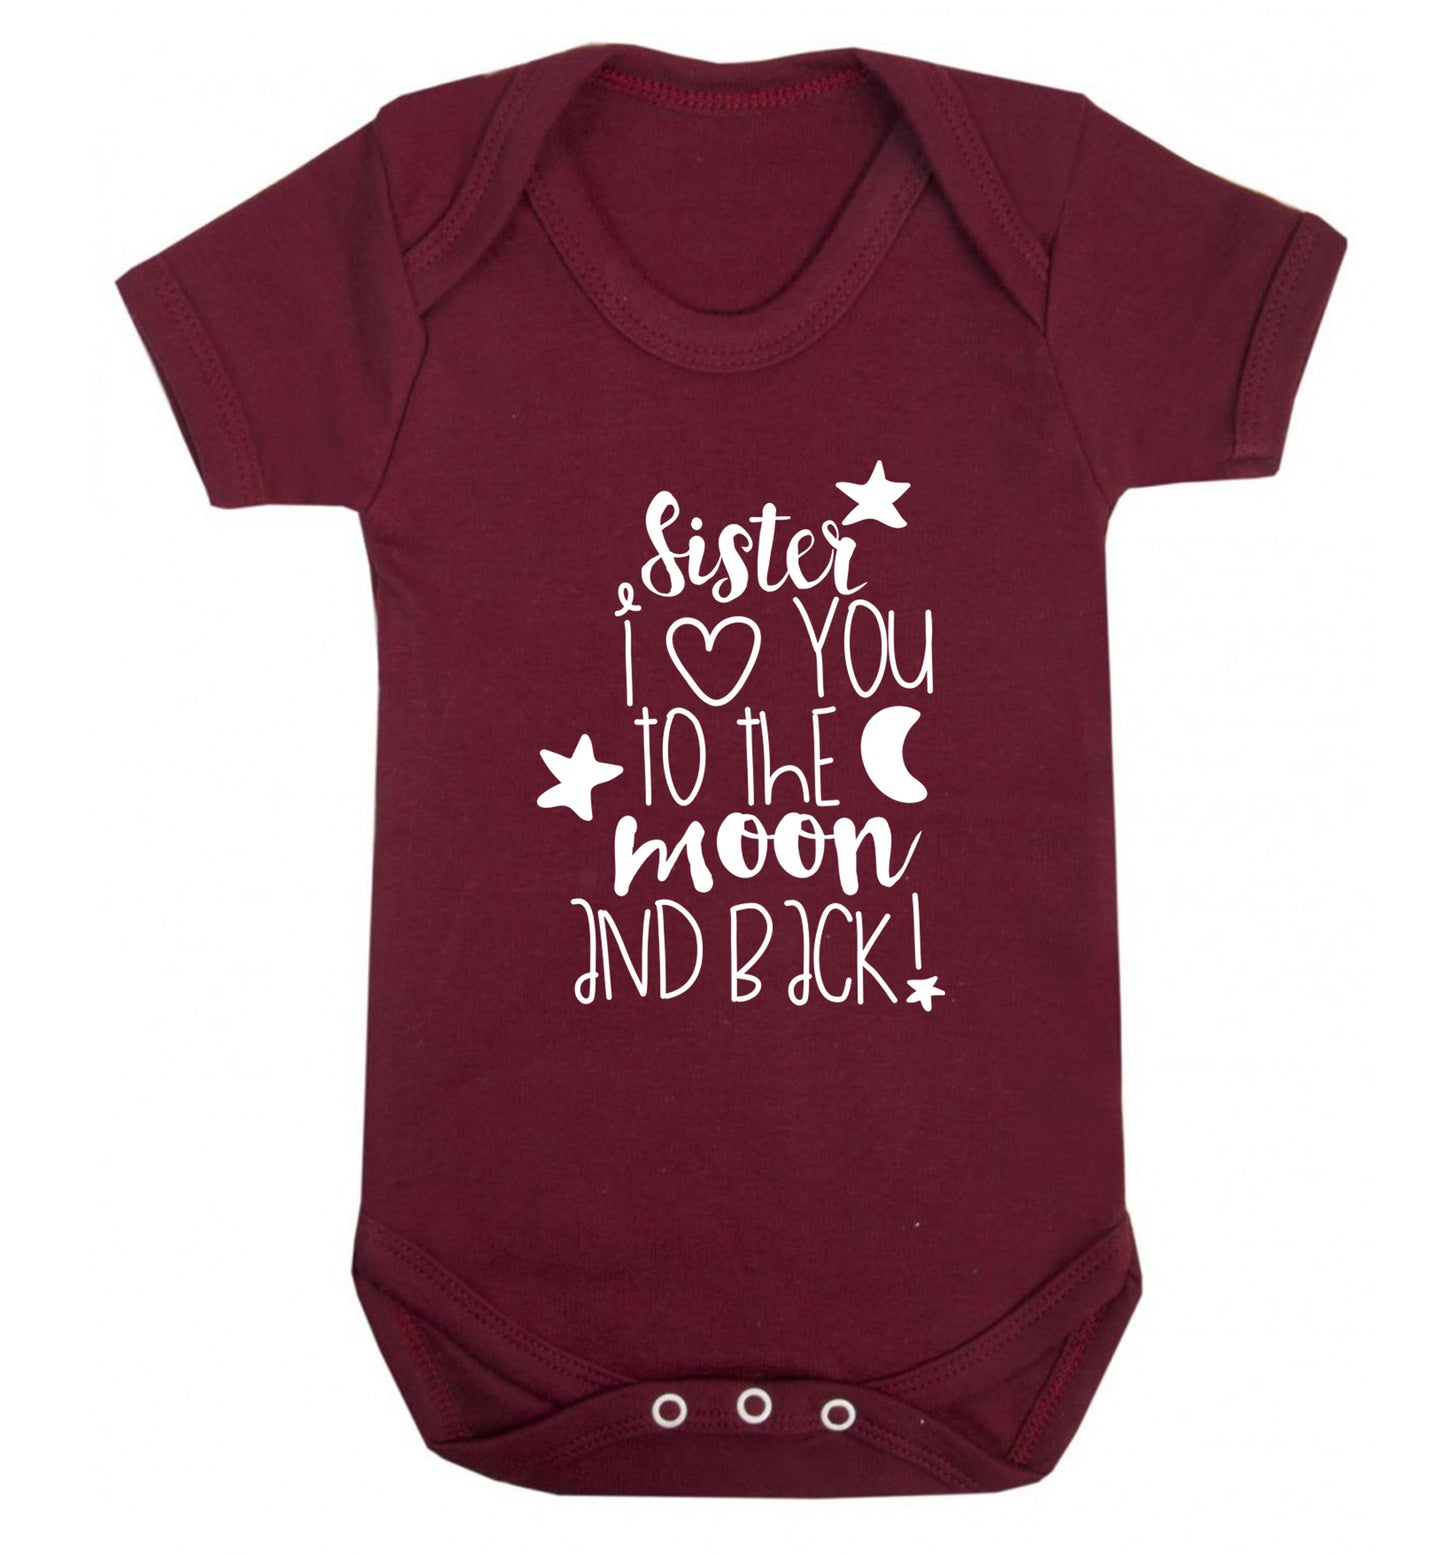 Sister I love you to the moon and back Baby Vest maroon 18-24 months